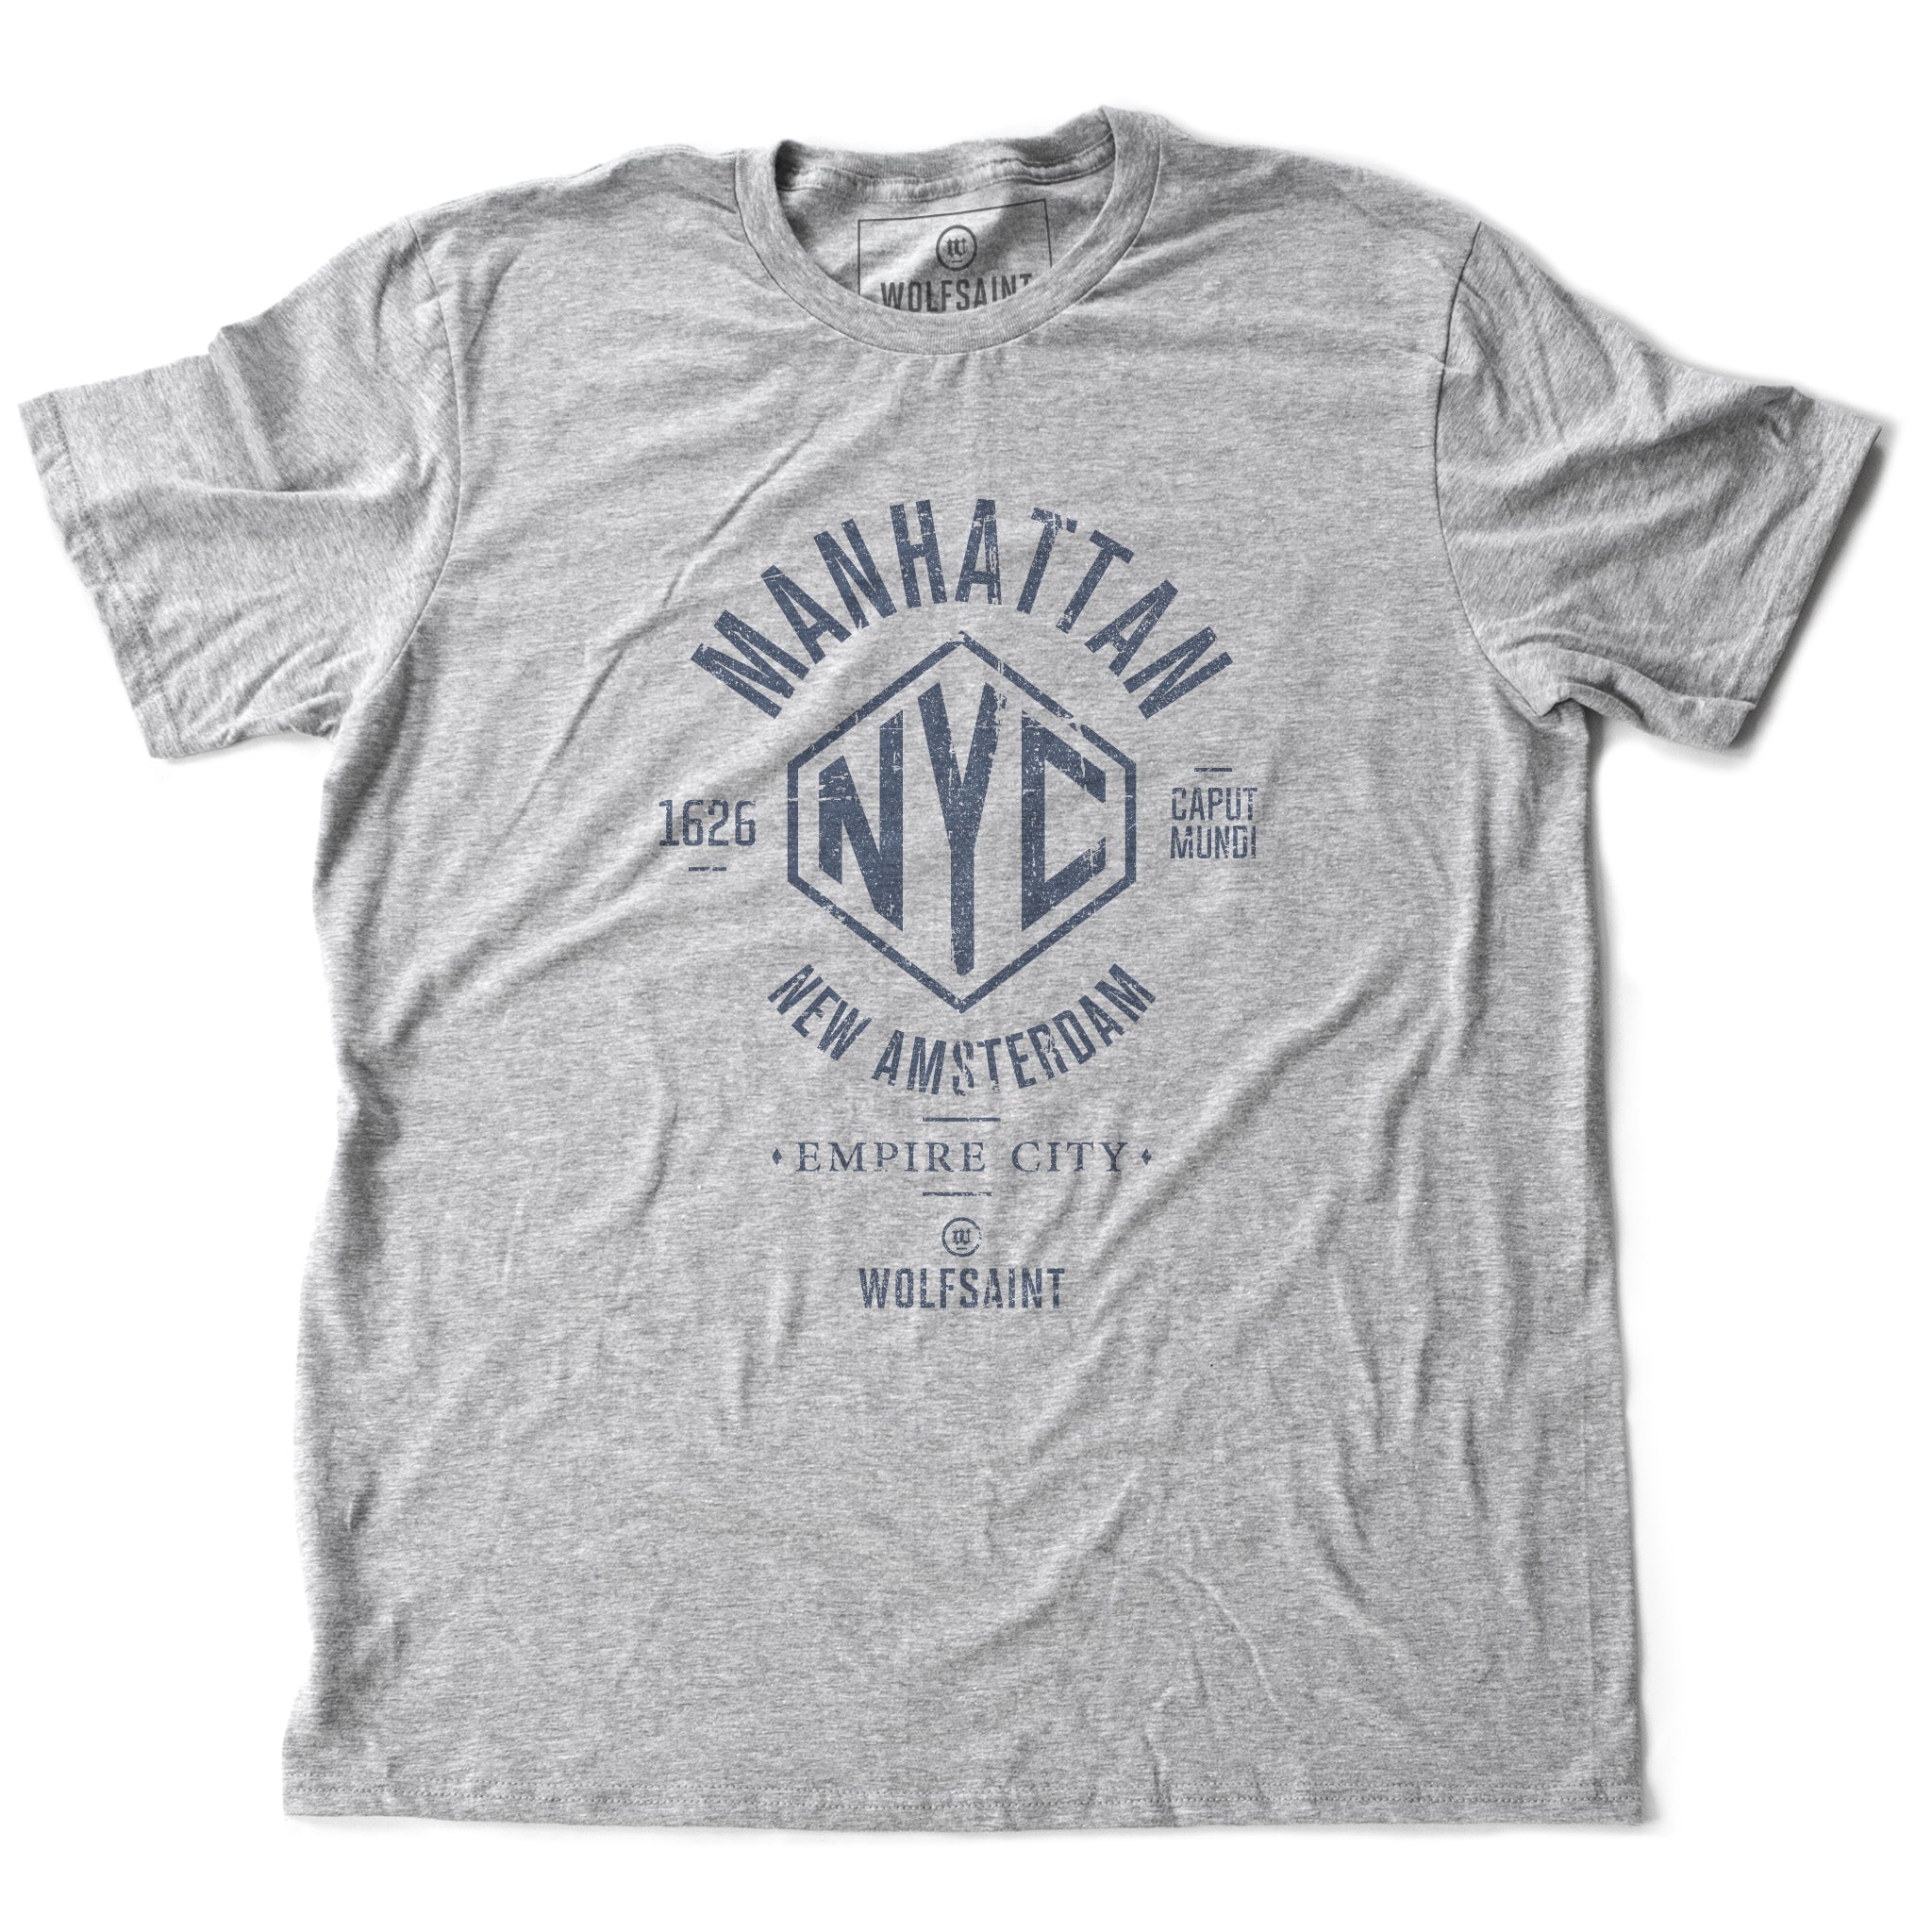 A vintage-inspired retro designed fashion-shirt in classic Athletic Heather Gray, featuring an “NYC” graphic surrounded by the words “Manhattan” and “New Amsterdam / Empire City” and the year of its founding, 1626, along with the Latin words Caput Mundi, meaning Capital of the World. From wolfsaint.net